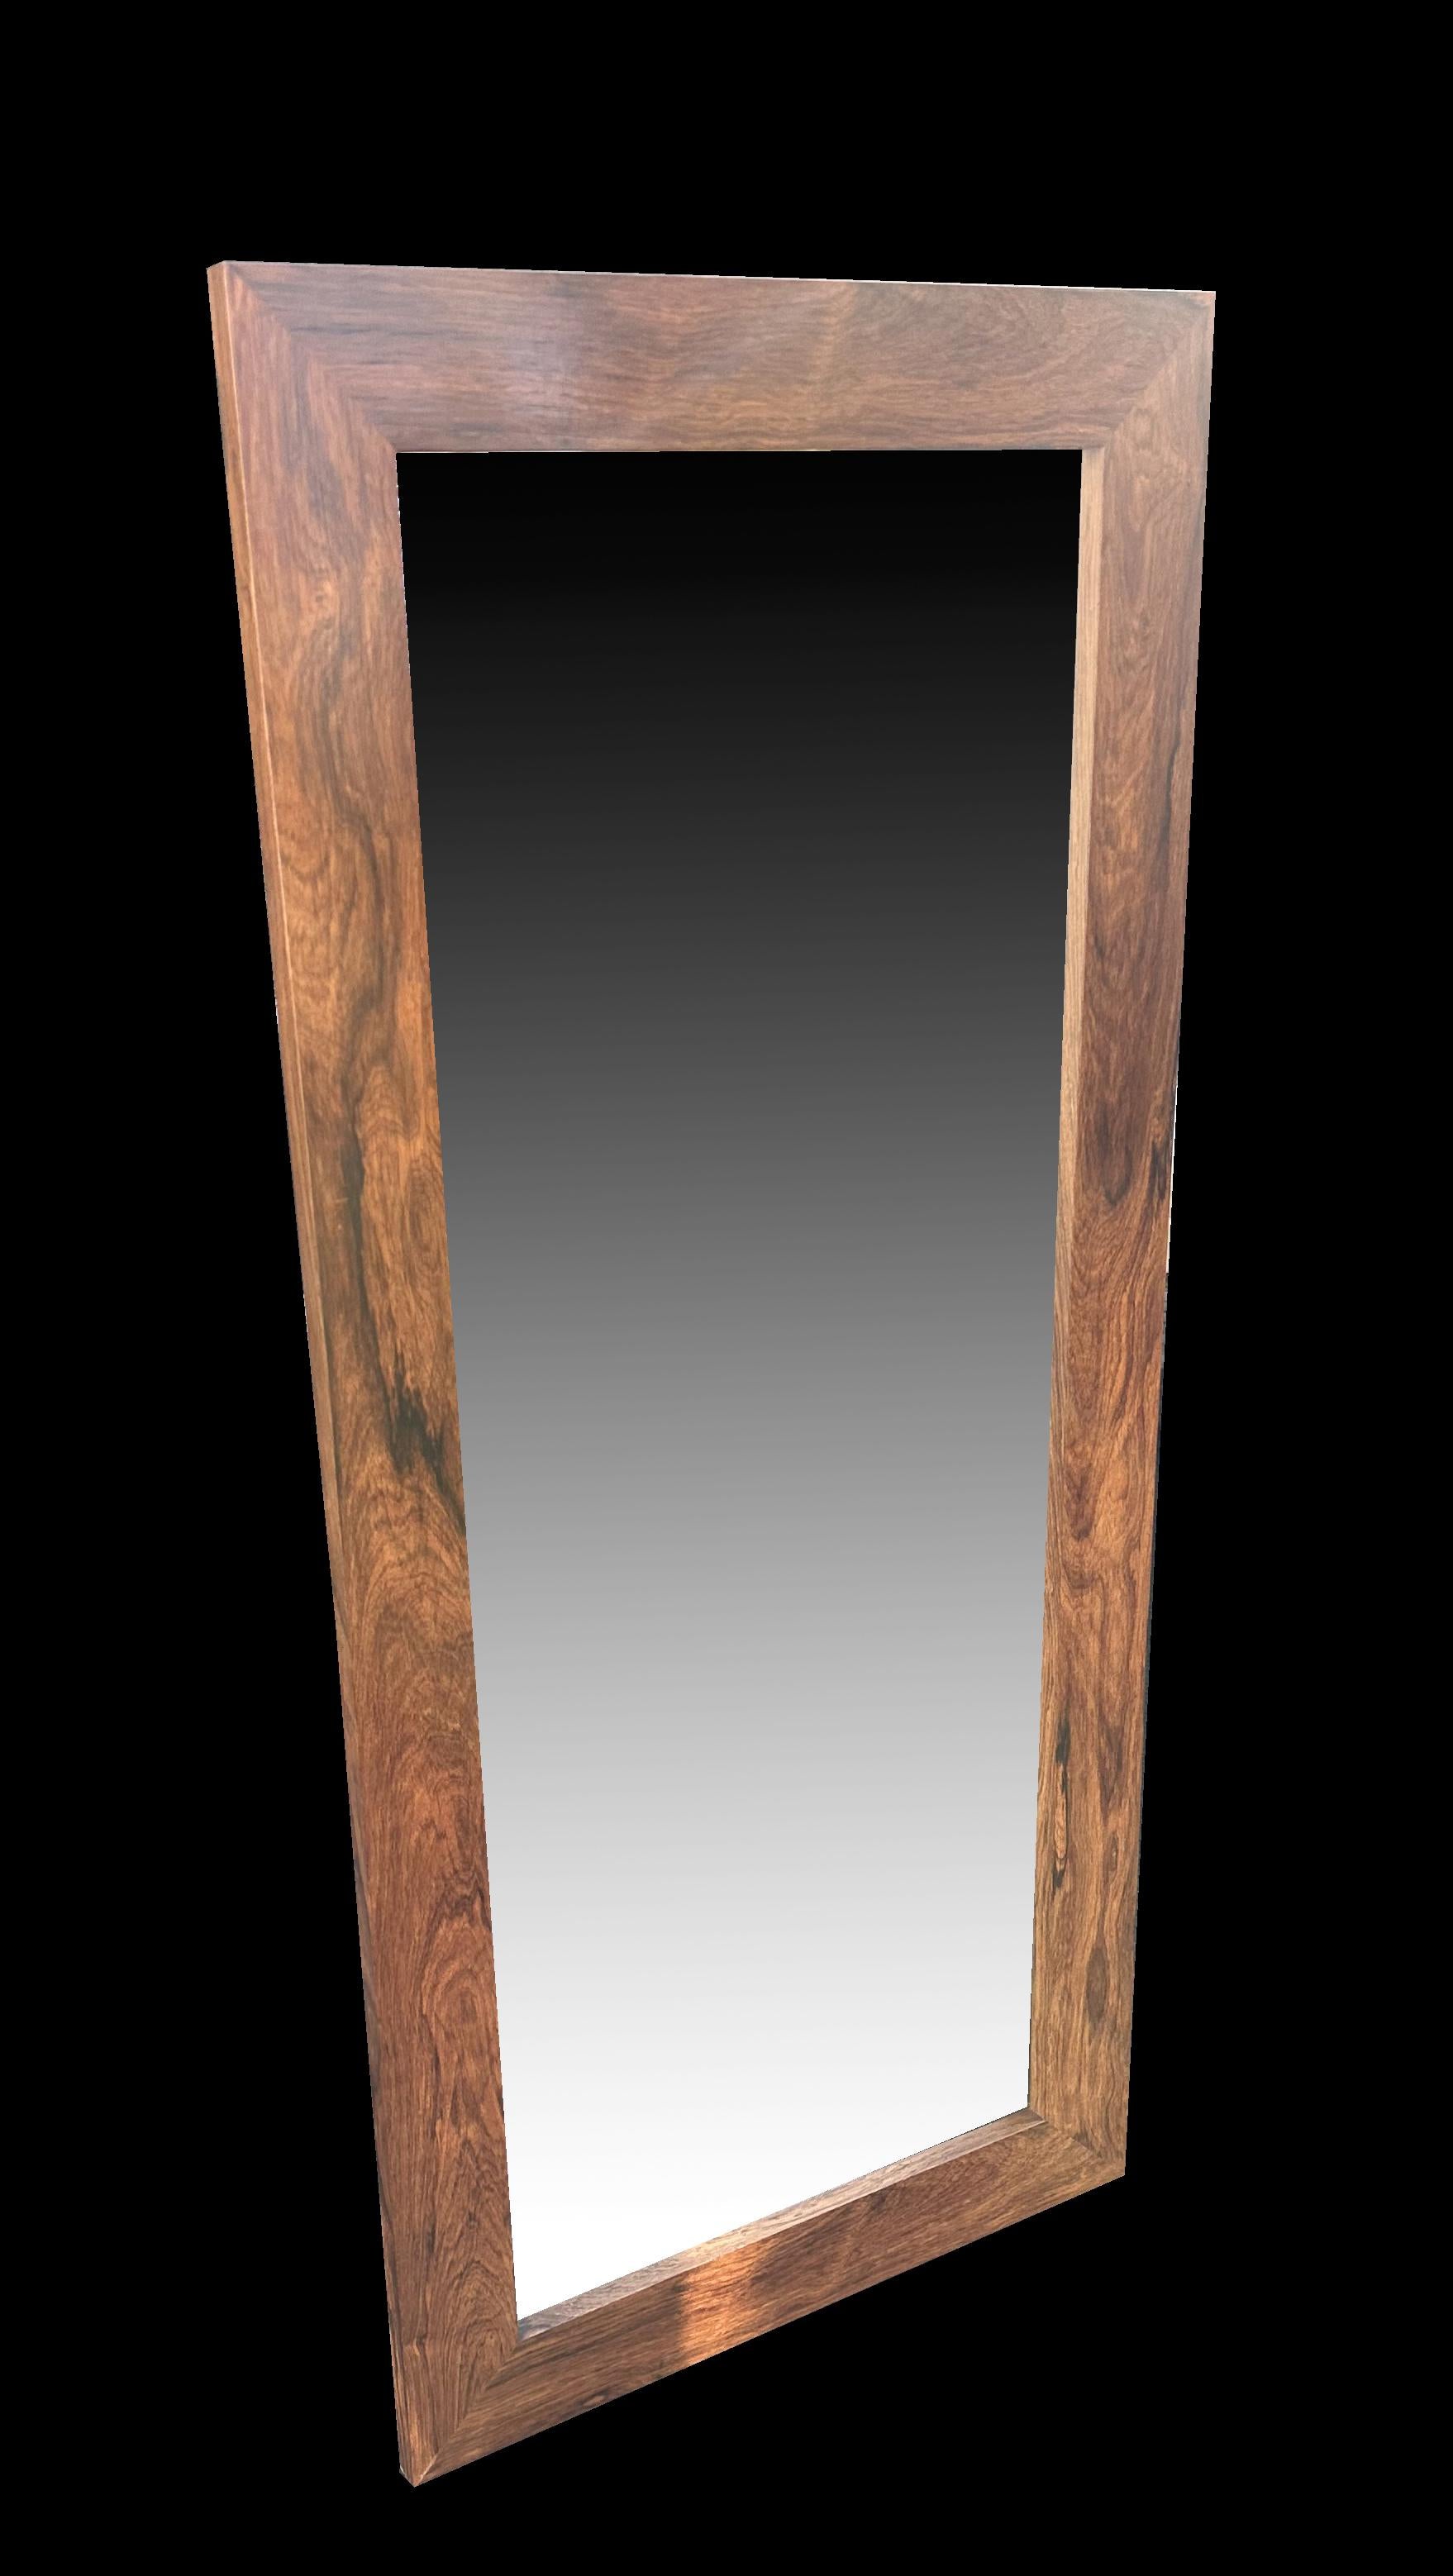 A very nice Santos Rosewood large wall mirror, all in good condition. The Rosewood used is Santos Rosewood (machaerium Scleroxylon) is not listed on CITES as a protected species so is no problem for import export.